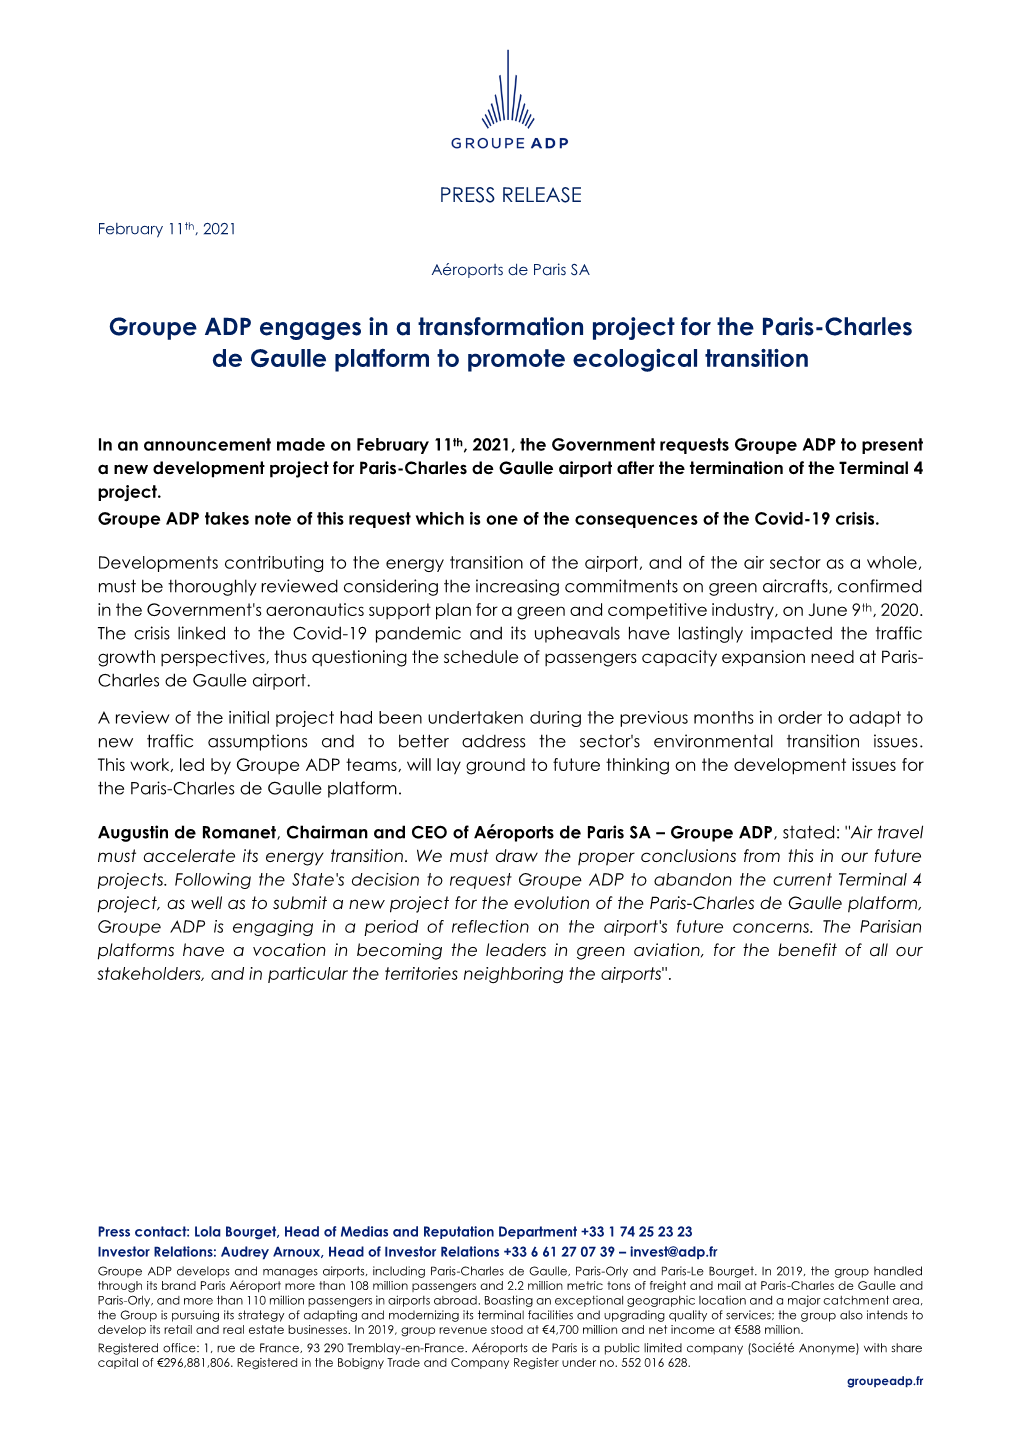 Groupe ADP Engages in a Transformation Project for the Paris-Charles De Gaulle Platform to Promote Ecological Transition